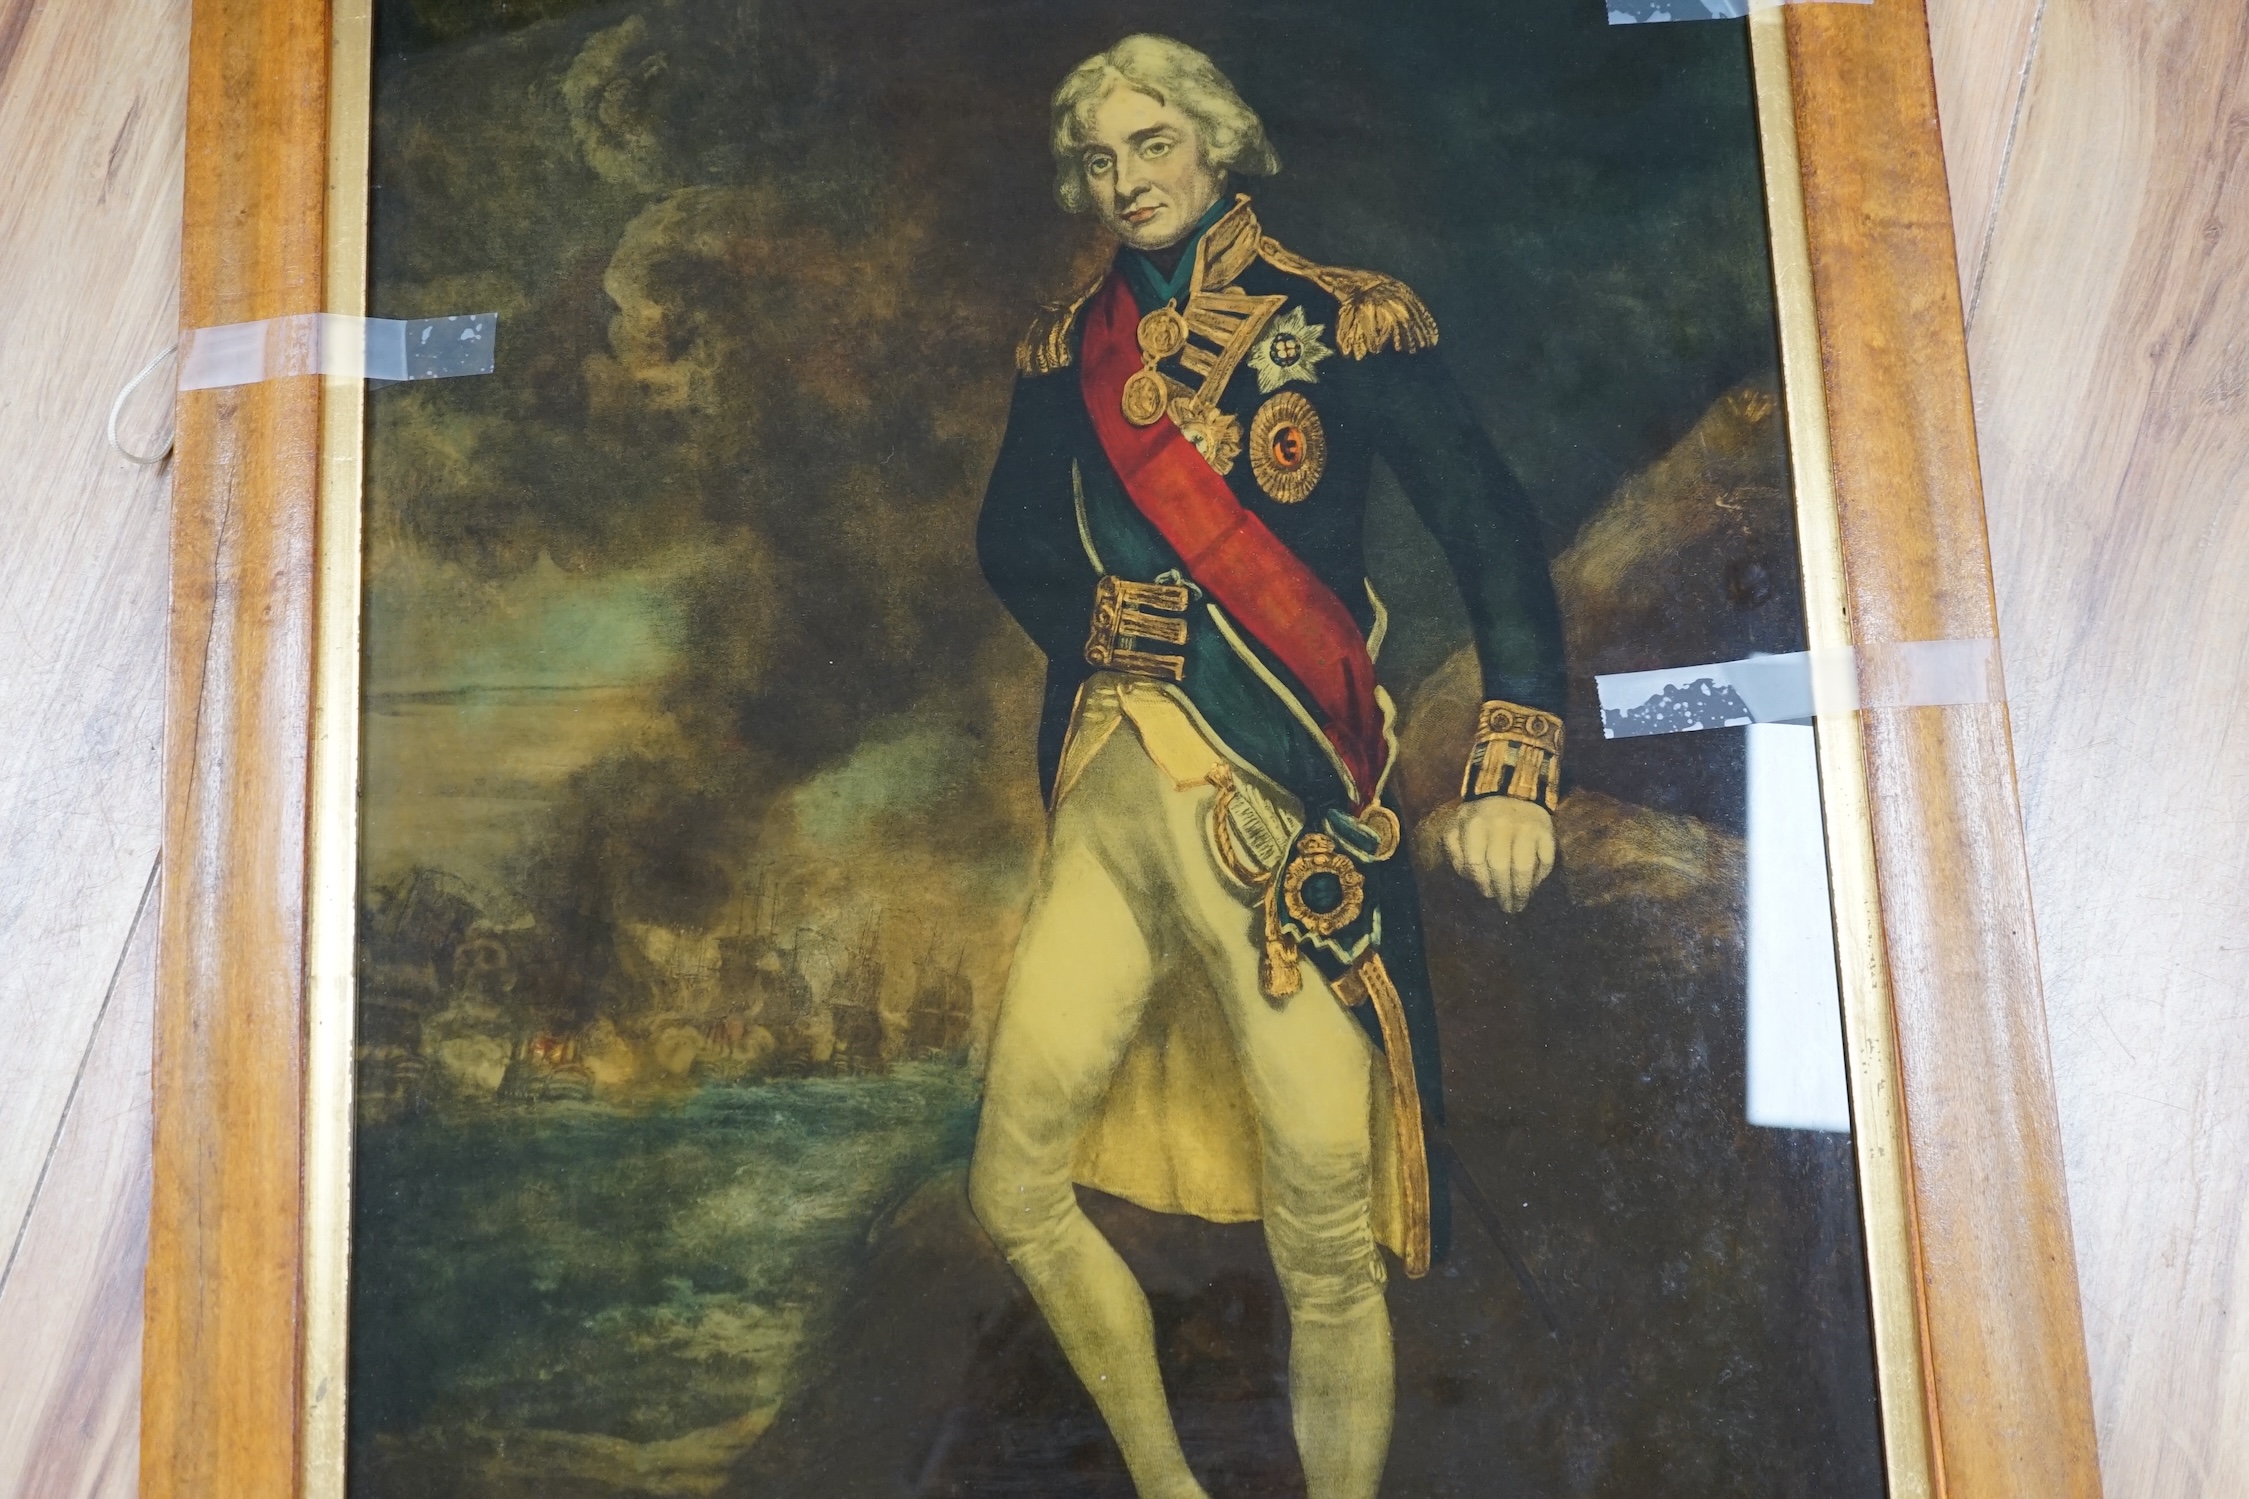 19th century, reverse glass painted print ‘Baron Nelson of the Nile’, 70 x 42cm. Condition - fair